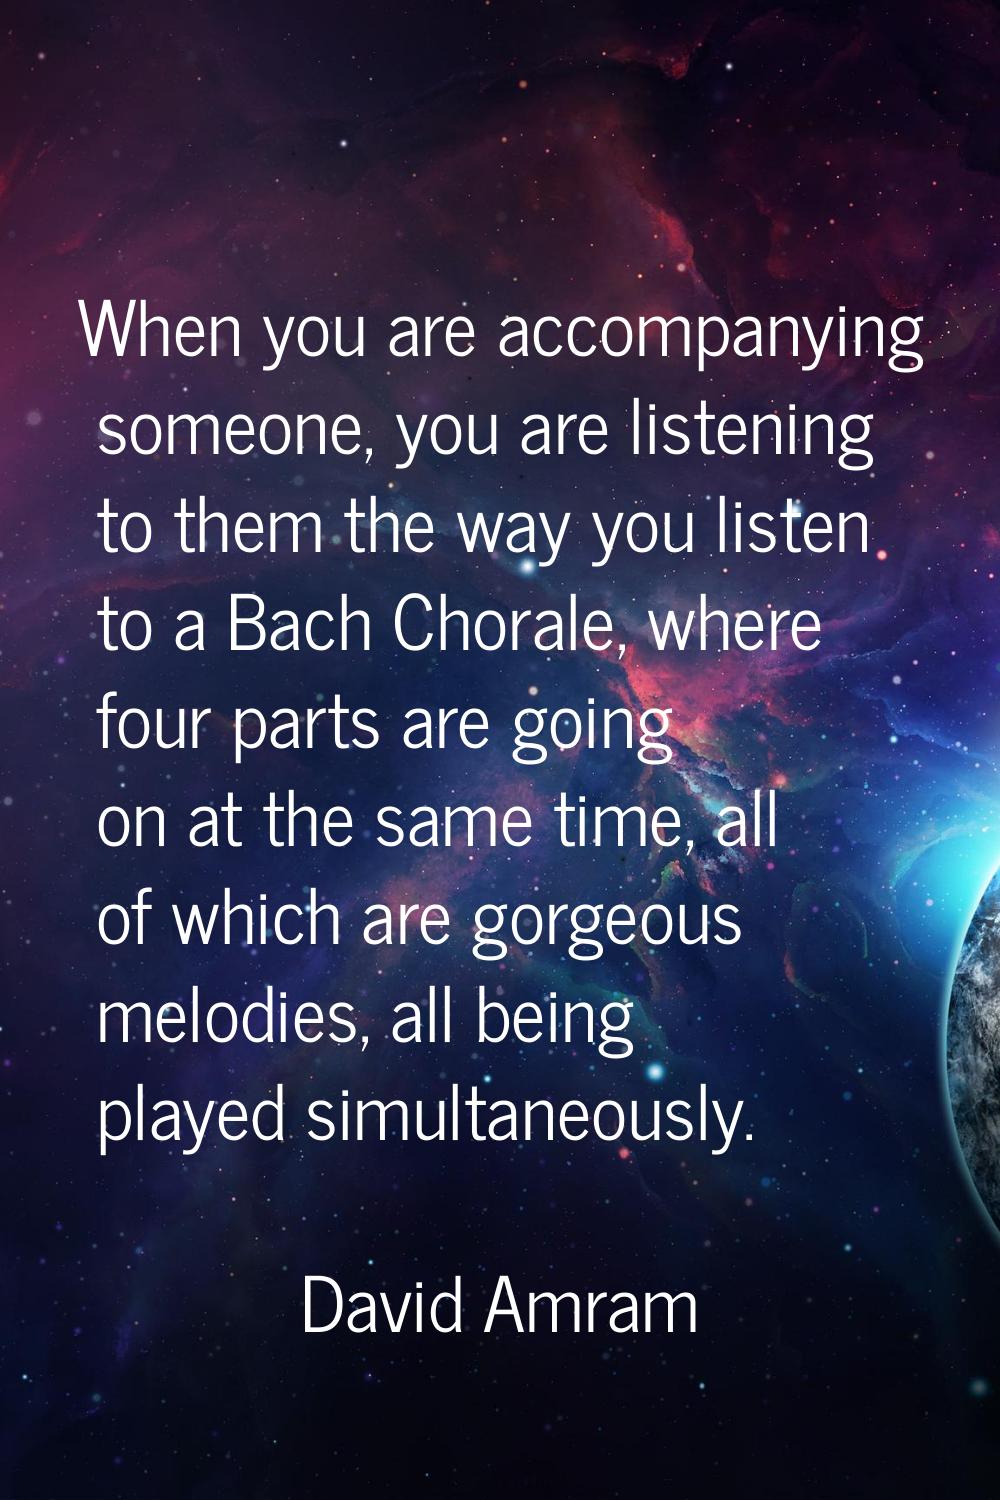 When you are accompanying someone, you are listening to them the way you listen to a Bach Chorale, 